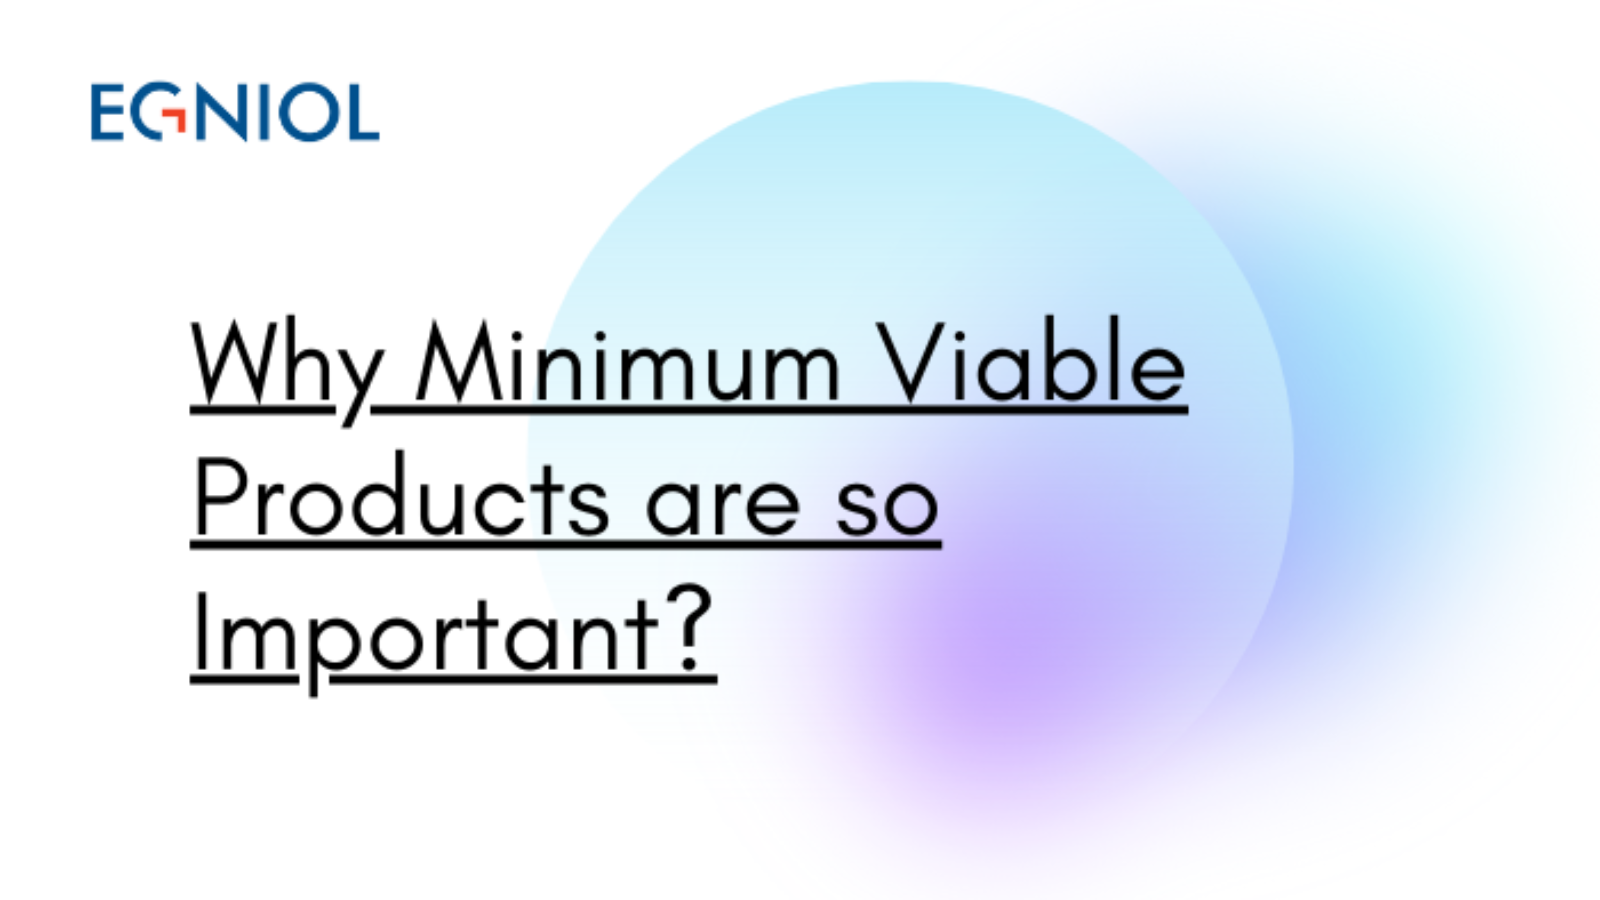 Why Minimum Viable Products are so Important? - By Egniol